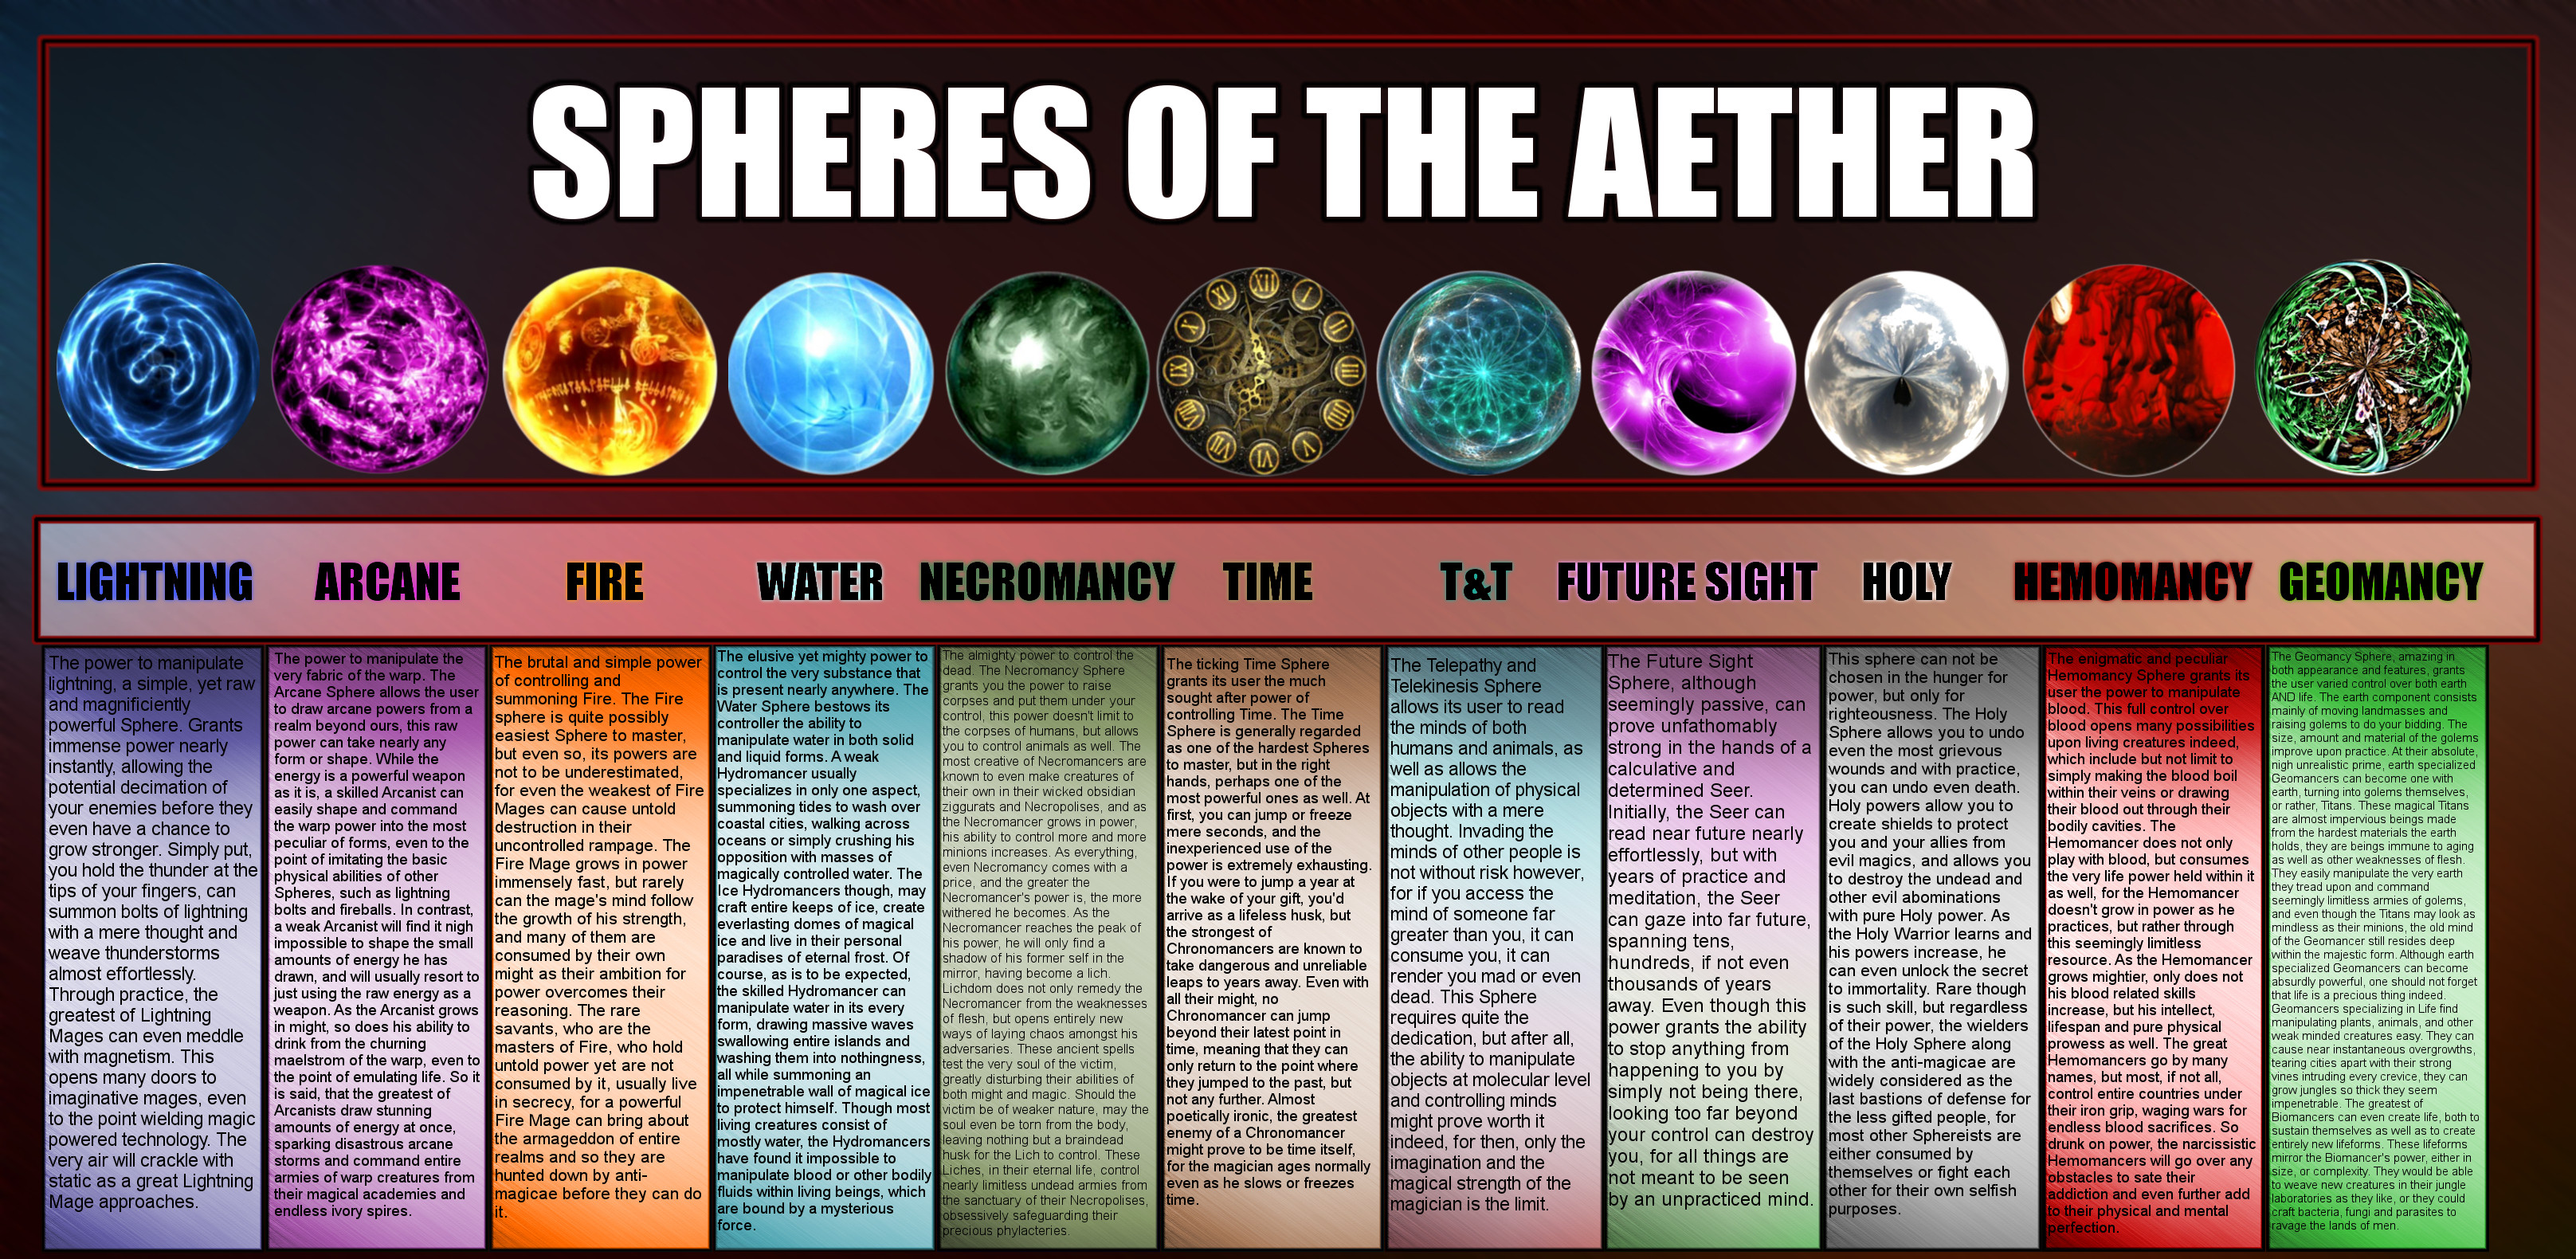 Spheres of the Anther.jpg